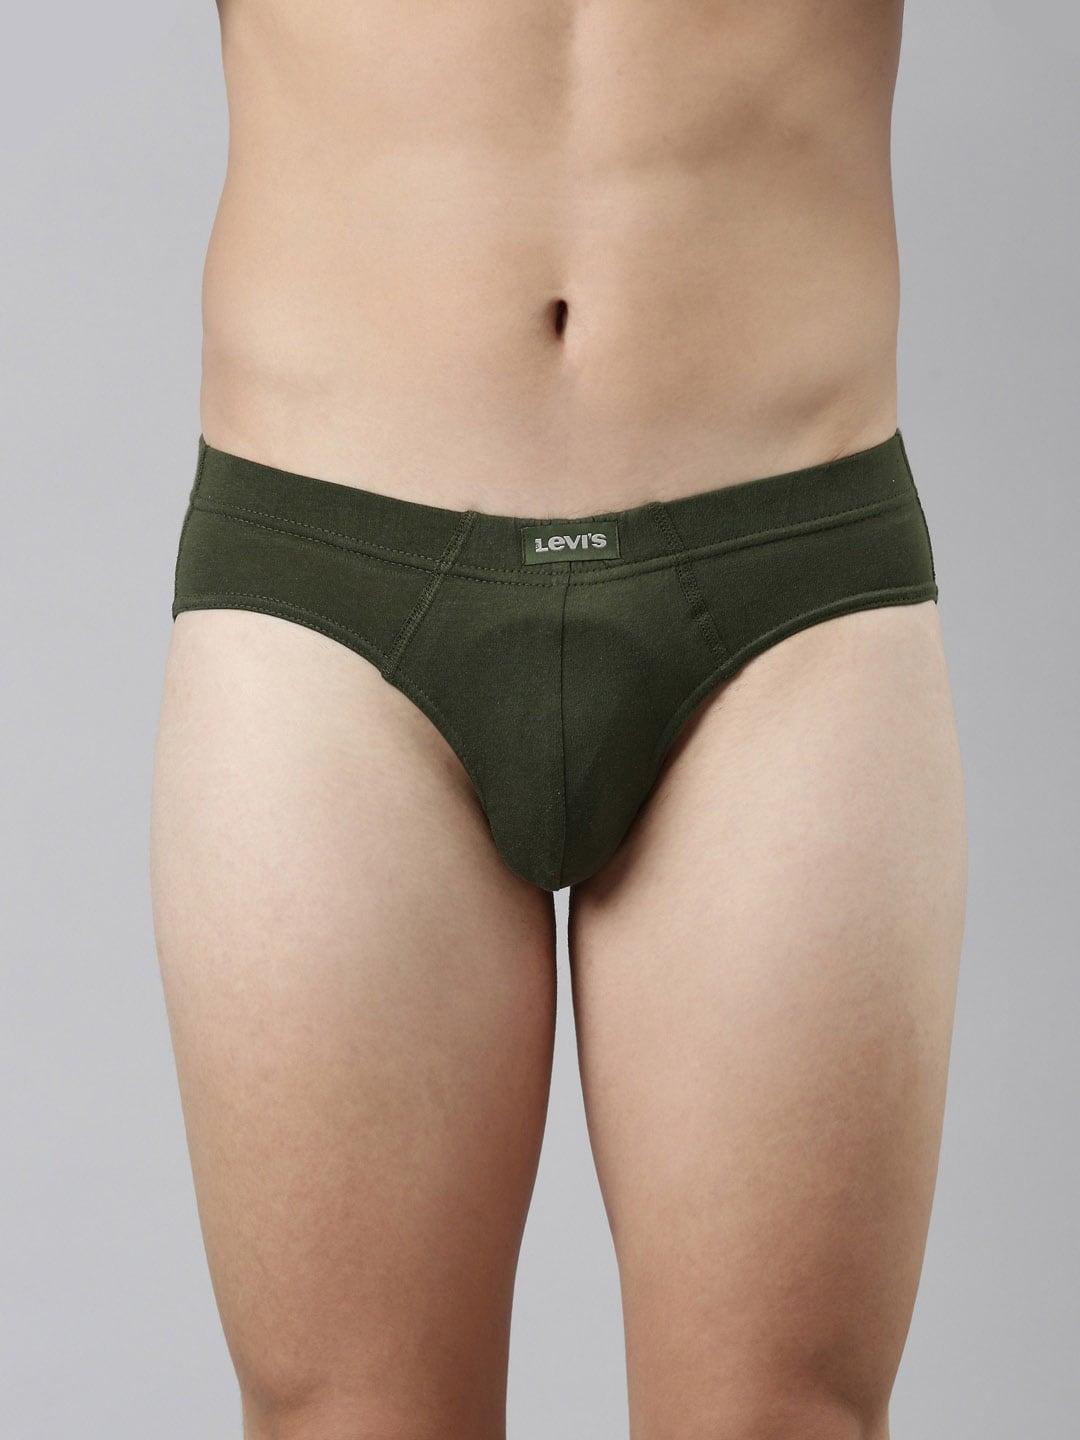 levis men comfort solid low-rise basic briefs style#011 brief riffle green